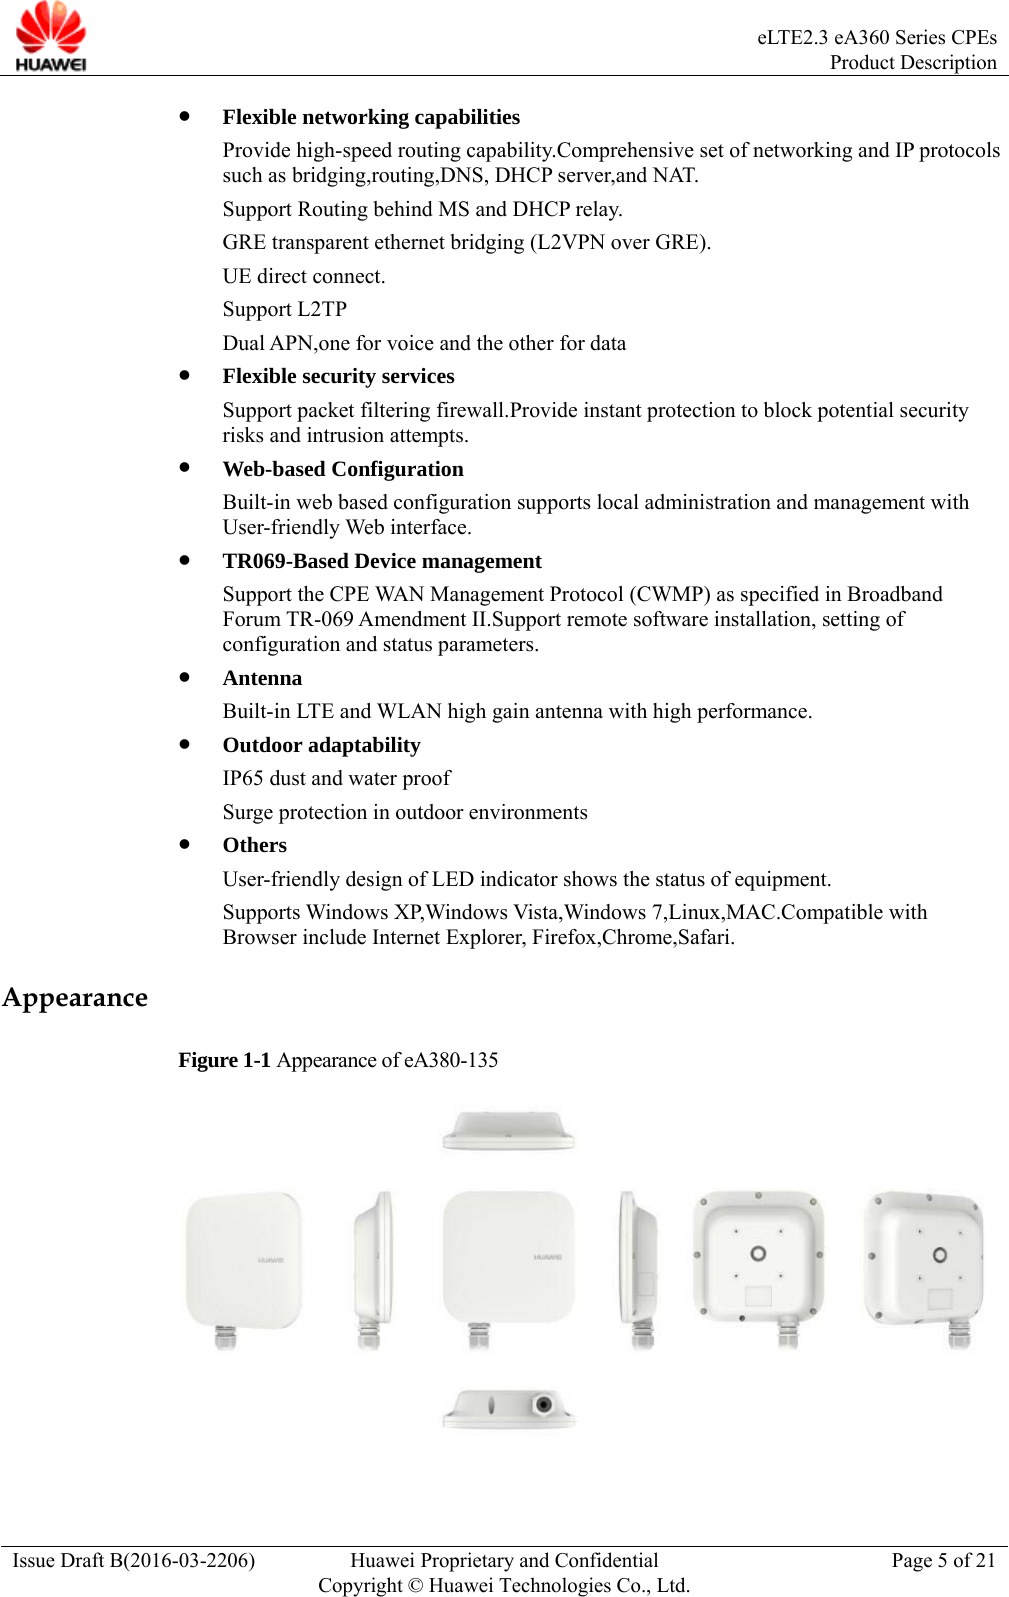  eLTE2.3 eA360 Series CPEsProduct Description Issue Draft B(2016-03-2206)  Huawei Proprietary and Confidential Copyright © Huawei Technologies Co., Ltd.Page 5 of 21  Flexible networking capabilities Provide high-speed routing capability.Comprehensive set of networking and IP protocols such as bridging,routing,DNS, DHCP server,and NAT. Support Routing behind MS and DHCP relay. GRE transparent ethernet bridging (L2VPN over GRE). UE direct connect. Support L2TP Dual APN,one for voice and the other for data  Flexible security services Support packet filtering firewall.Provide instant protection to block potential security risks and intrusion attempts.  Web-based Configuration Built-in web based configuration supports local administration and management with User-friendly Web interface.  TR069-Based Device management Support the CPE WAN Management Protocol (CWMP) as specified in Broadband Forum TR-069 Amendment II.Support remote software installation, setting of configuration and status parameters.  Antenna Built-in LTE and WLAN high gain antenna with high performance.  Outdoor adaptability IP65 dust and water proof Surge protection in outdoor environments  Others User-friendly design of LED indicator shows the status of equipment. Supports Windows XP,Windows Vista,Windows 7,Linux,MAC.Compatible with Browser include Internet Explorer, Firefox,Chrome,Safari. Appearance Figure 1-1 Appearance of eA380-135  